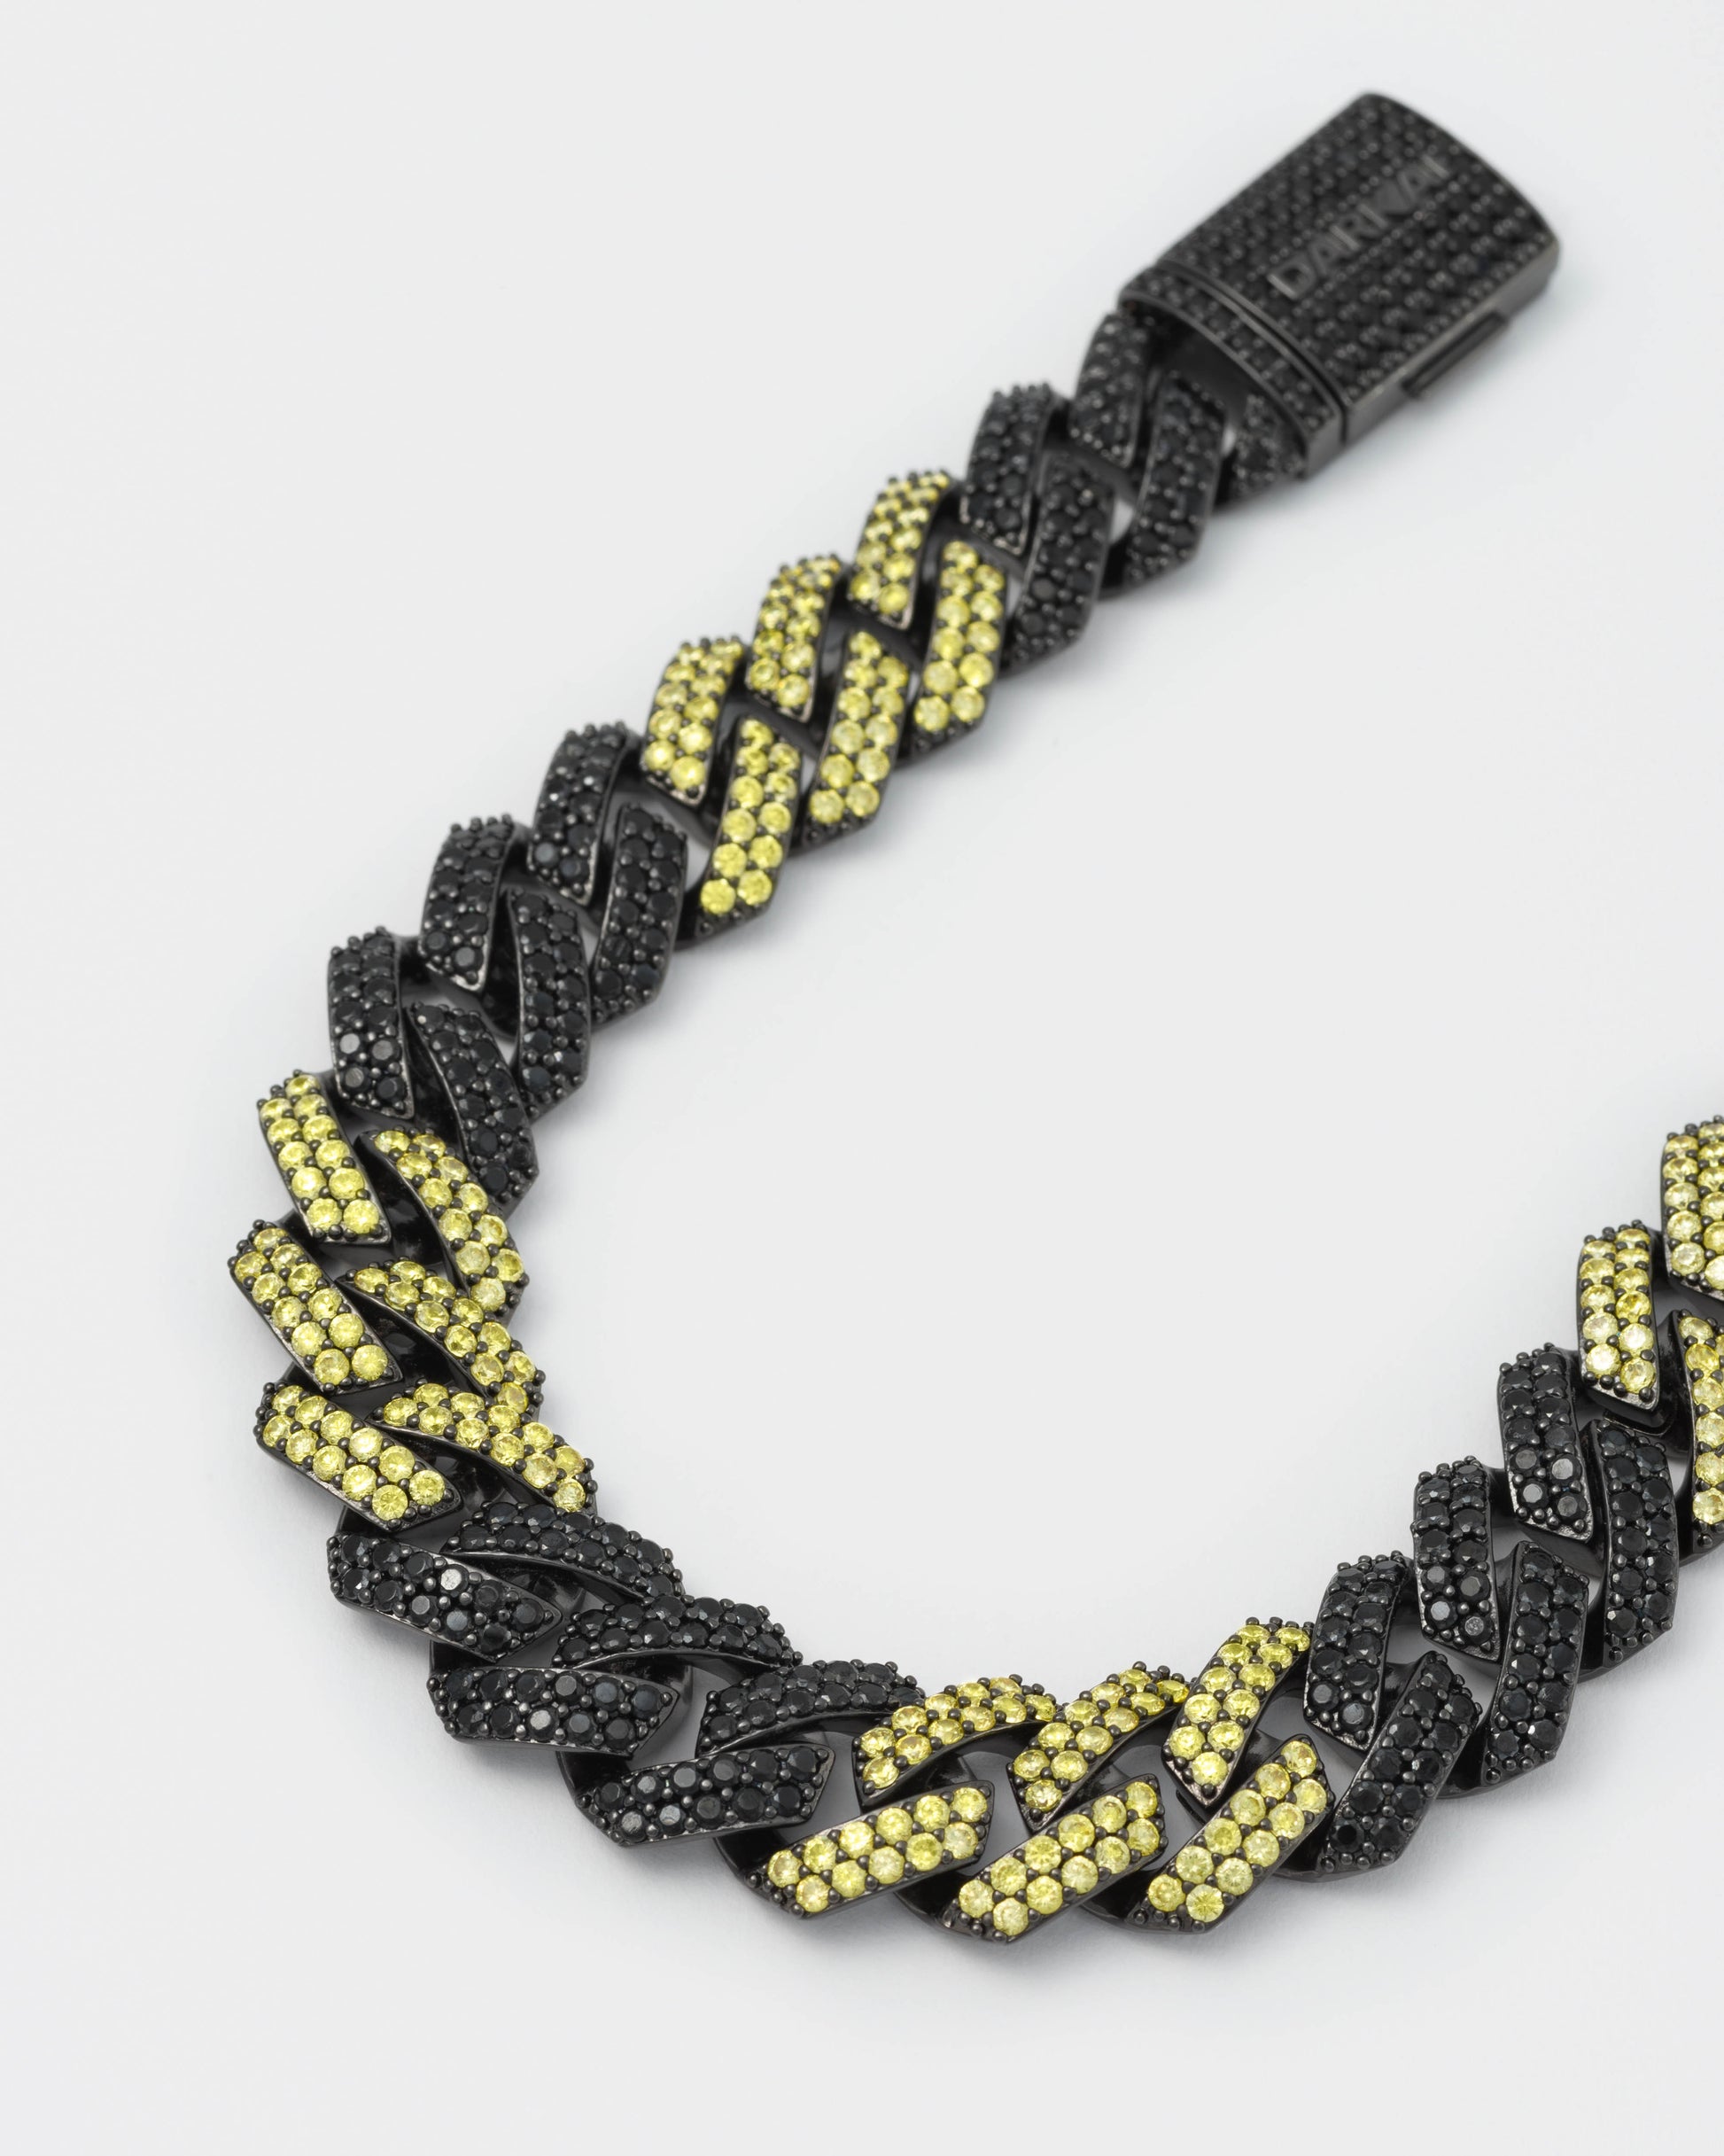 detail of prong chain necklace with deep black PVD coating and hand-set micropavé stones in black and golden yellow. Fine jewelry grade drawer closure with logo